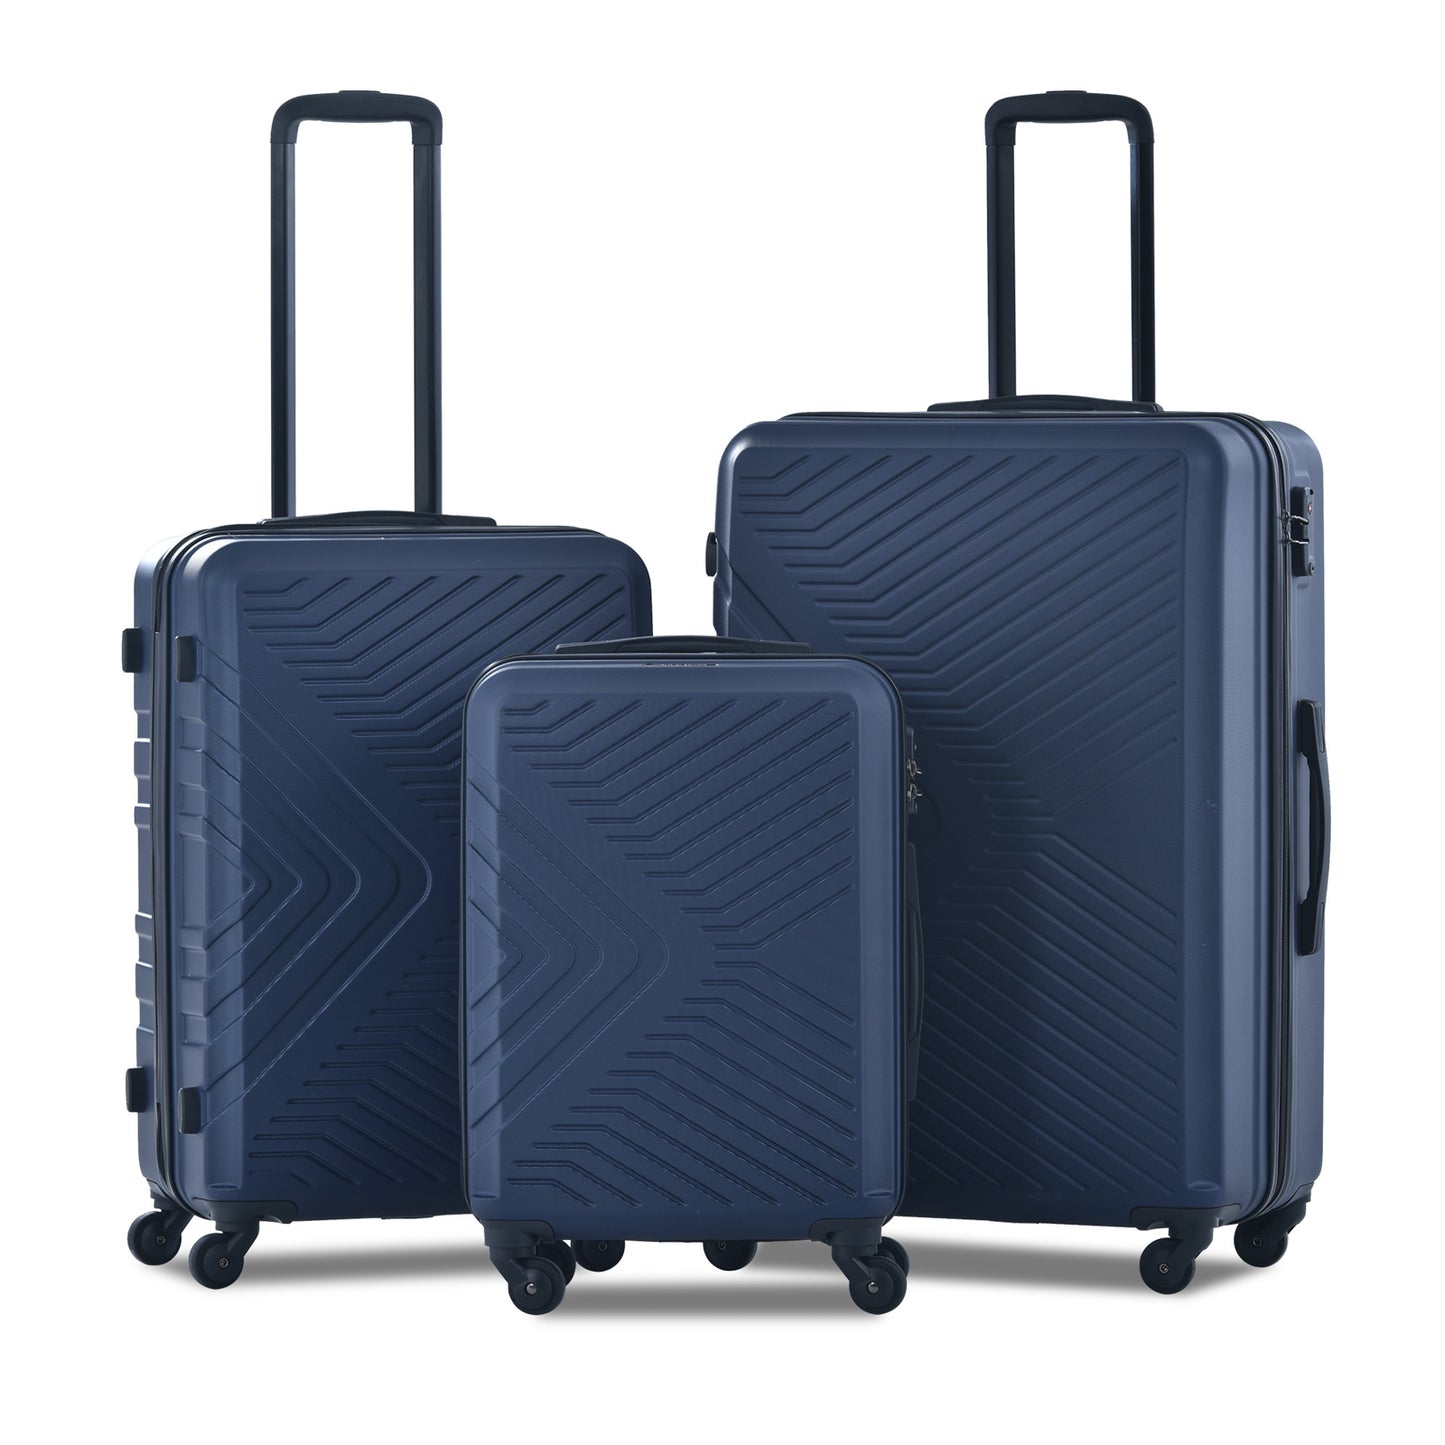 3 Piece Luggage Sets ABS Lightweight Suitcase with Two Hooks, Spinner Wheels, TSA Lock, (20/24/28) Navy